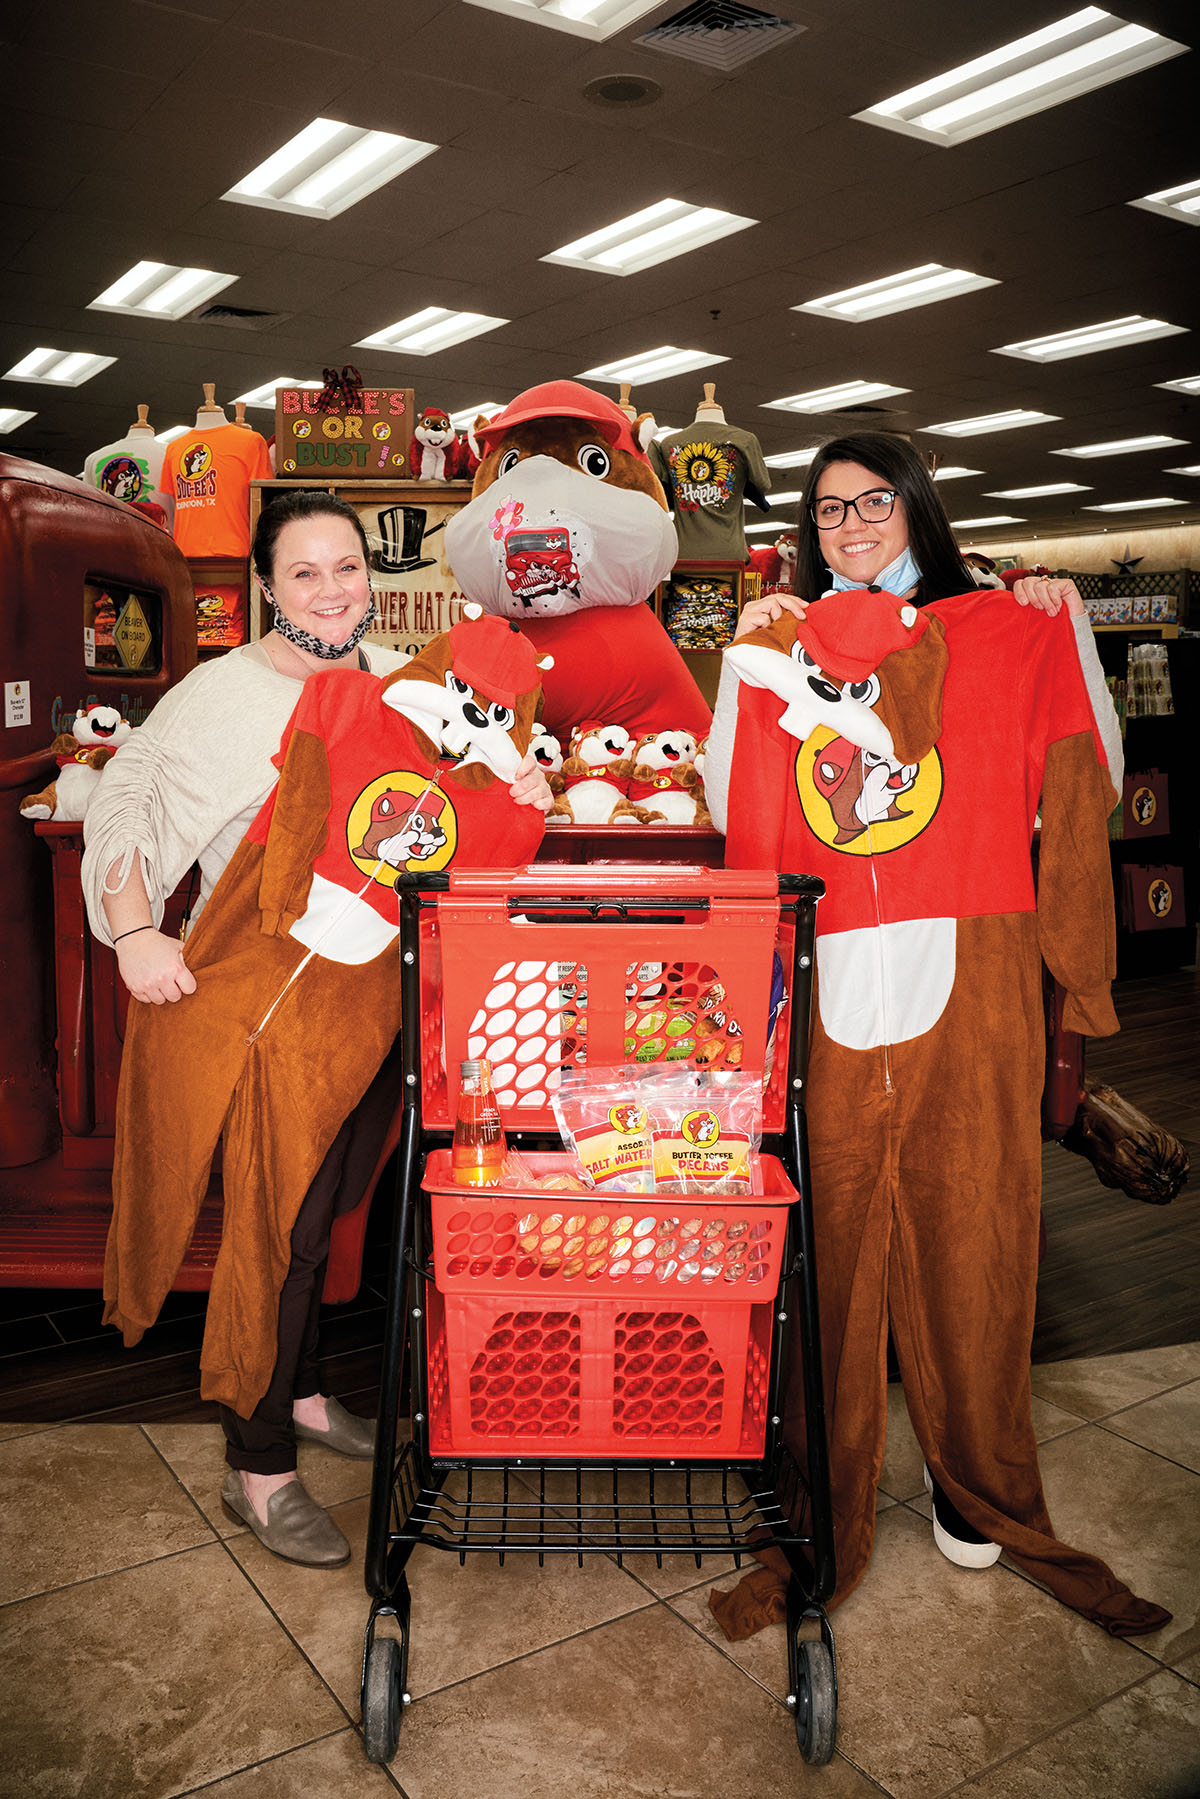 Two women pose with Buc-ees onesies in front of a stuffed beaver